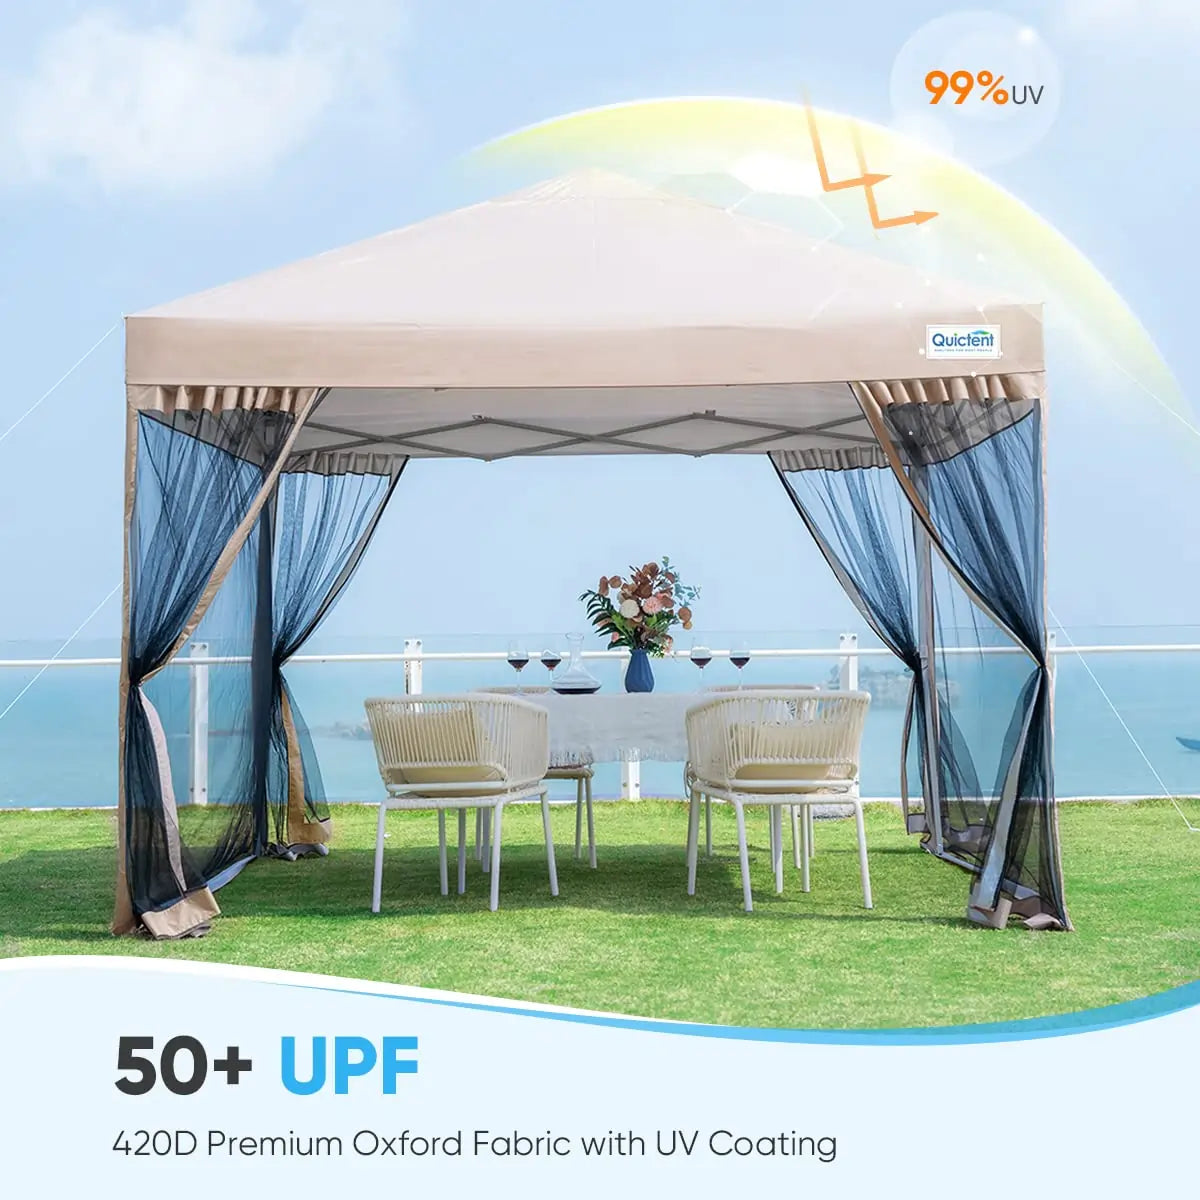 6.6' x 6.6' Small Pop Up Canopy with Netting - 50+ UPF